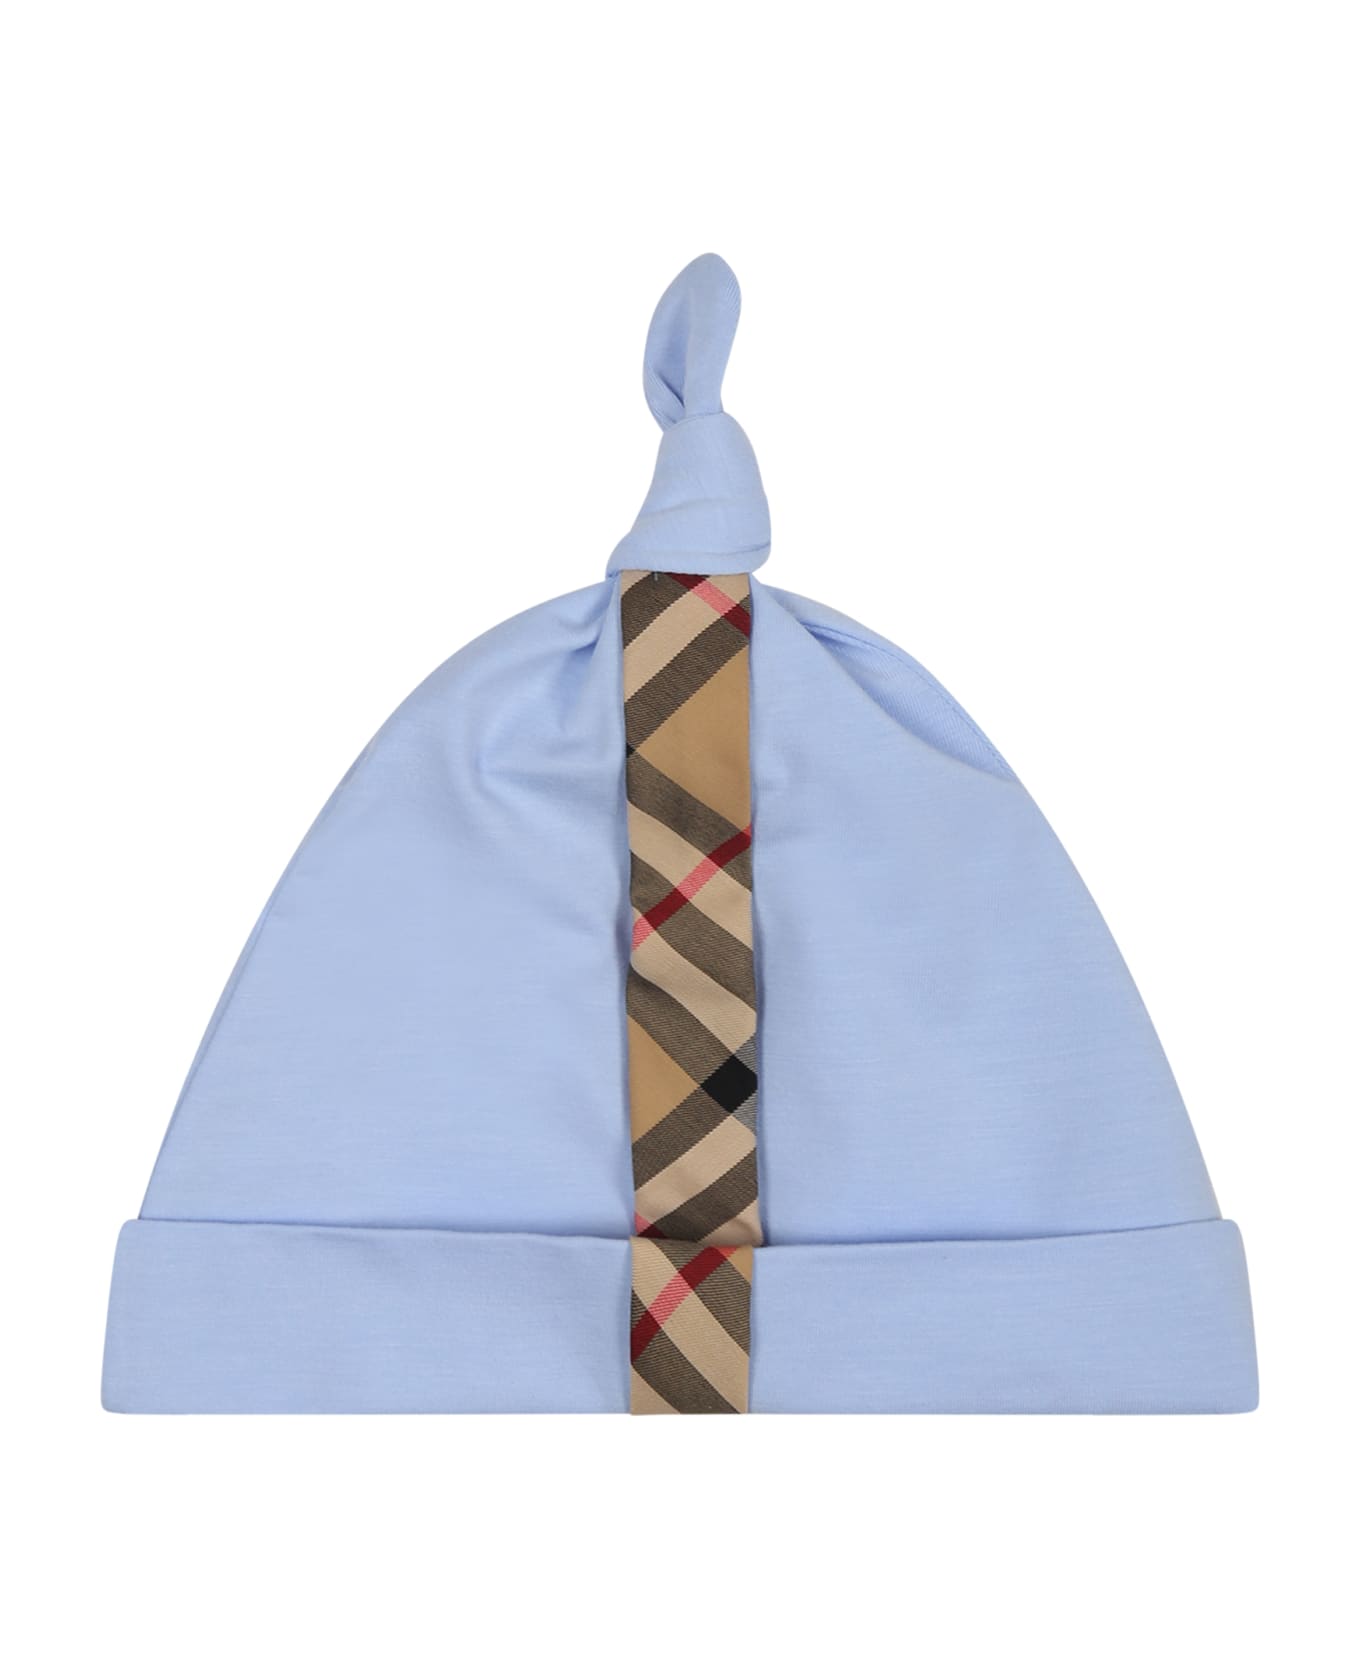 Burberry Light Blue Set For Baby Boy With Logo - Light Blue ボディスーツ＆セットアップ